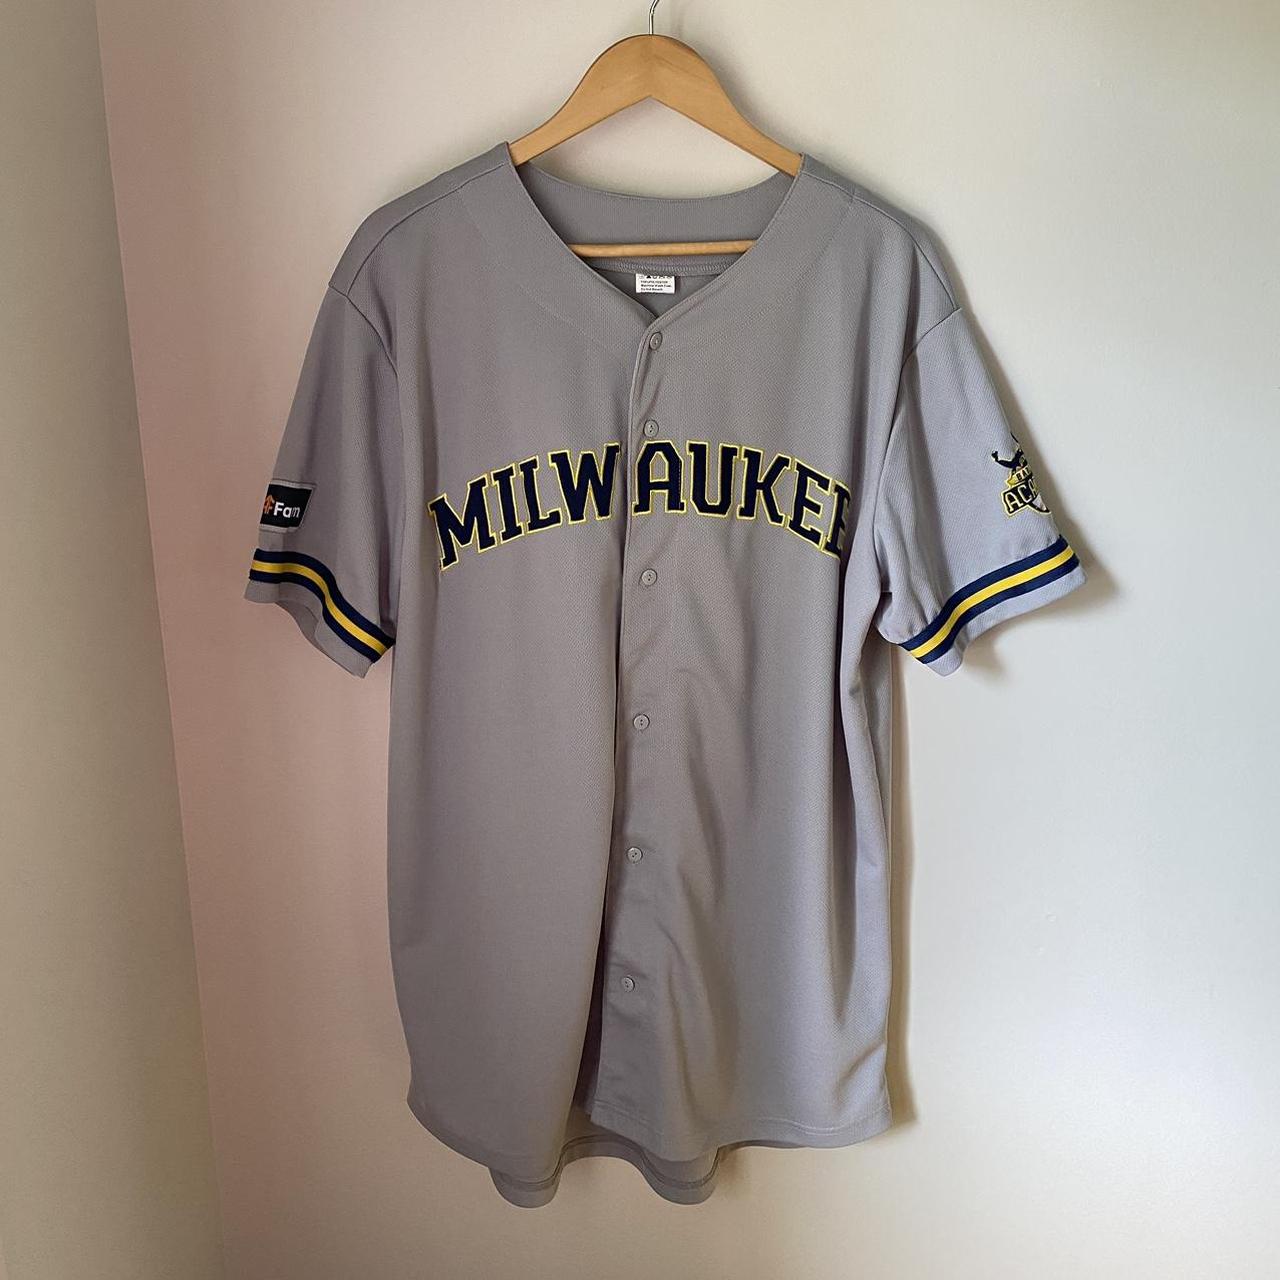 Milwaukee Brewers baseball jersey. Patches on the